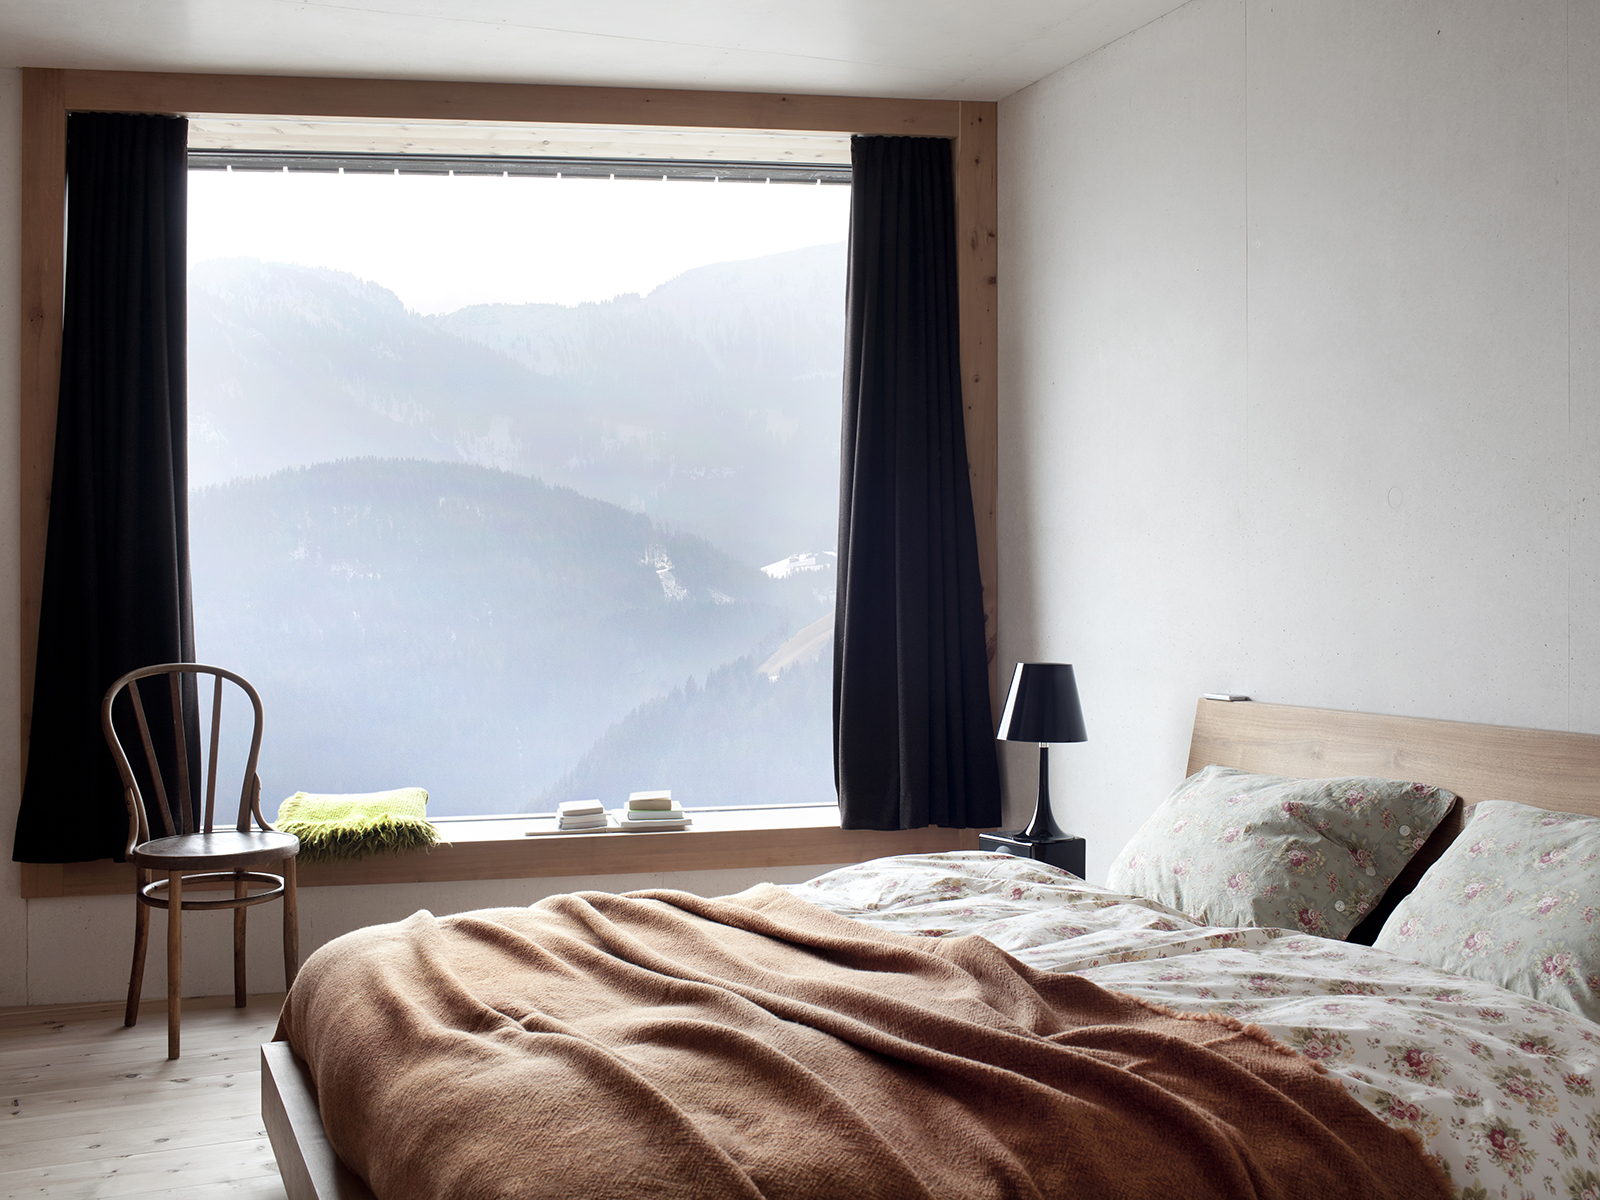 Simple room featuring double bed, chair, light, and window with stunning views across the mountains